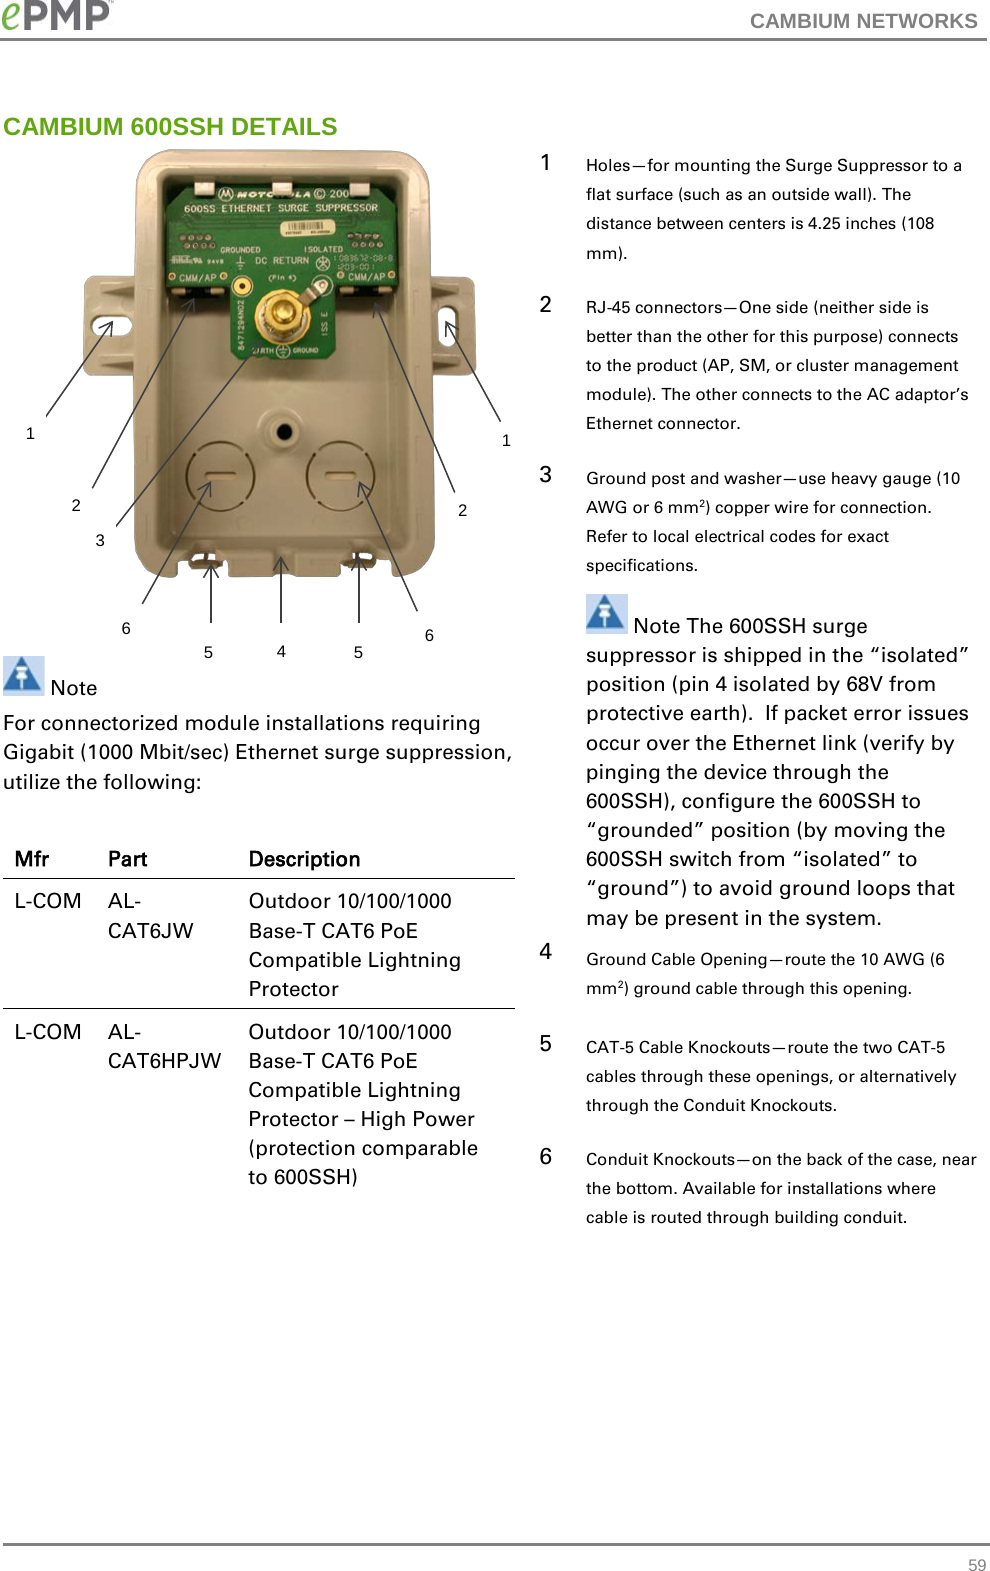 CAMBIUM NETWORKS  CAMBIUM 600SSH DETAILS     Note For connectorized module installations requiring Gigabit (1000 Mbit/sec) Ethernet surge suppression, utilize the following:  Mfr Part Description L-COM AL-CAT6JW Outdoor 10/100/1000 Base-T CAT6 PoE Compatible Lightning Protector L-COM AL-CAT6HPJW Outdoor 10/100/1000 Base-T CAT6 PoE Compatible Lightning Protector – High Power (protection comparable to 600SSH)  1  Holes—for mounting the Surge Suppressor to a flat surface (such as an outside wall). The distance between centers is 4.25 inches (108 mm). 2  RJ-45 connectors—One side (neither side is better than the other for this purpose) connects to the product (AP, SM, or cluster management module). The other connects to the AC adaptor’s Ethernet connector. 3  Ground post and washer—use heavy gauge (10 AWG or 6 mm2) copper wire for connection. Refer to local electrical codes for exact specifications.  Note The 600SSH surge suppressor is shipped in the “isolated” position (pin 4 isolated by 68V from protective earth).  If packet error issues occur over the Ethernet link (verify by pinging the device through the 600SSH), configure the 600SSH to “grounded” position (by moving the 600SSH switch from “isolated” to “ground”) to avoid ground loops that may be present in the system. 4  Ground Cable Opening—route the 10 AWG (6 mm2) ground cable through this opening. 5  CAT-5 Cable Knockouts—route the two CAT-5 cables through these openings, or alternatively through the Conduit Knockouts. 6  Conduit Knockouts—on the back of the case, near the bottom. Available for installations where cable is routed through building conduit. 1 2 3 6 5 4 5 6 2 1  59 